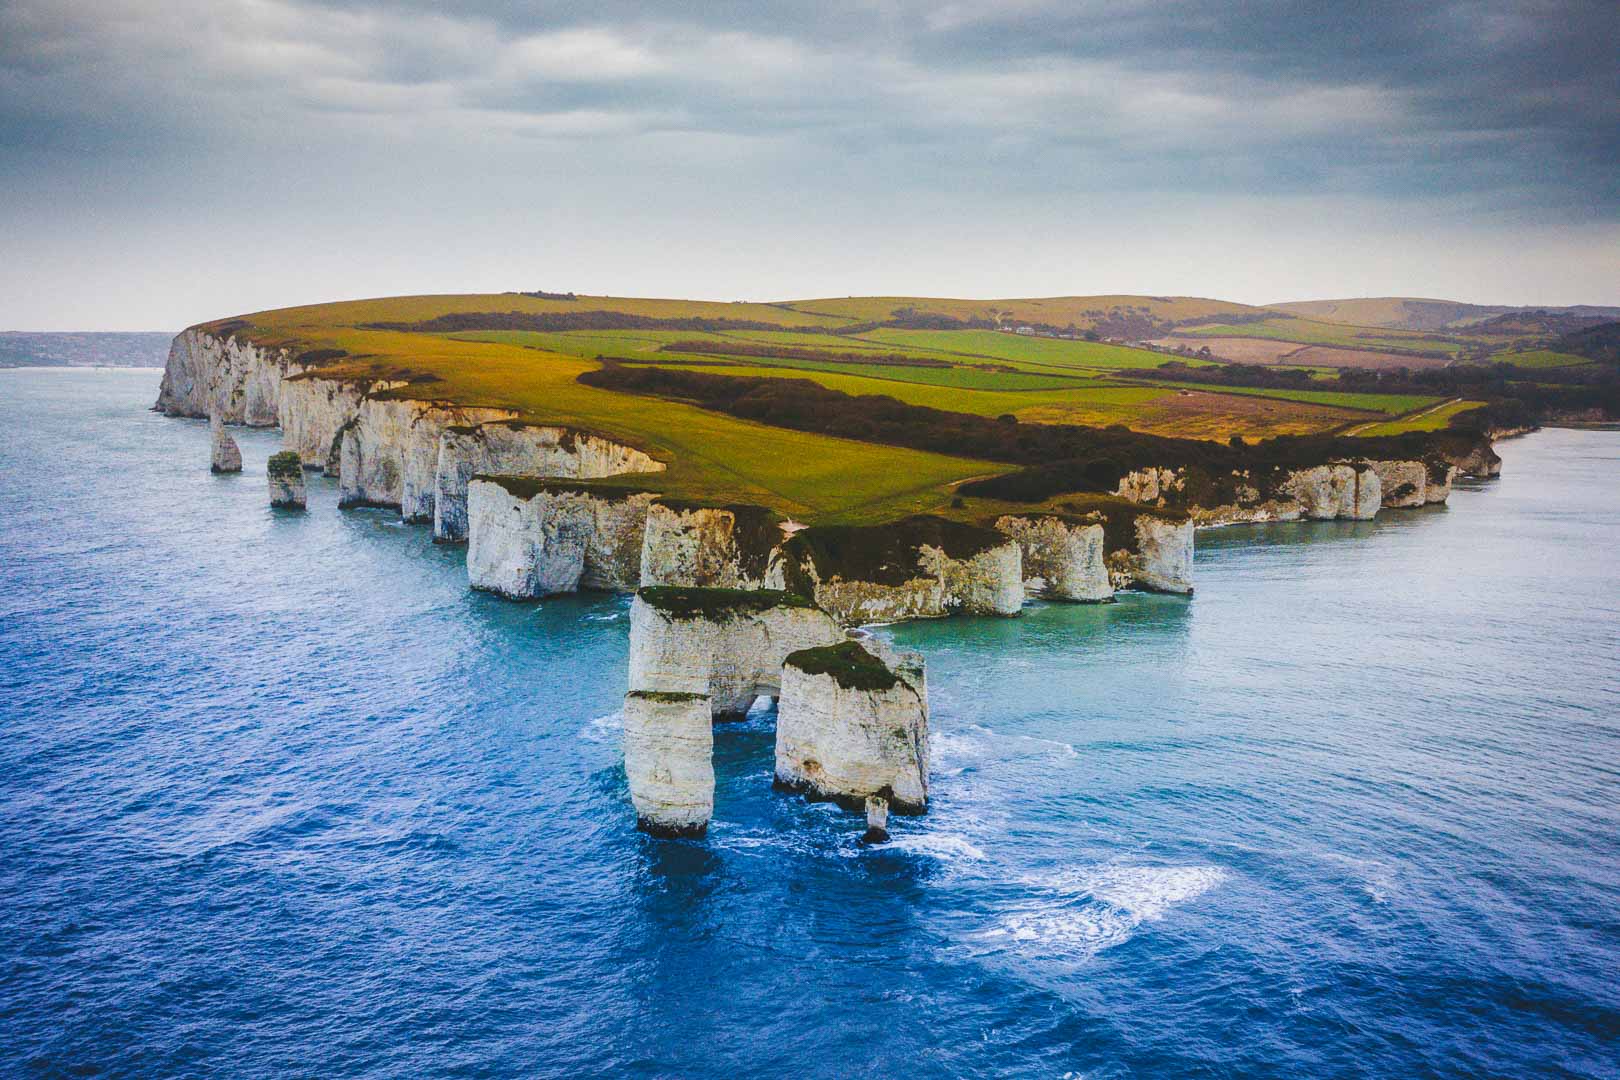 Old Harry Rocks – 65 million years old epic cliffs